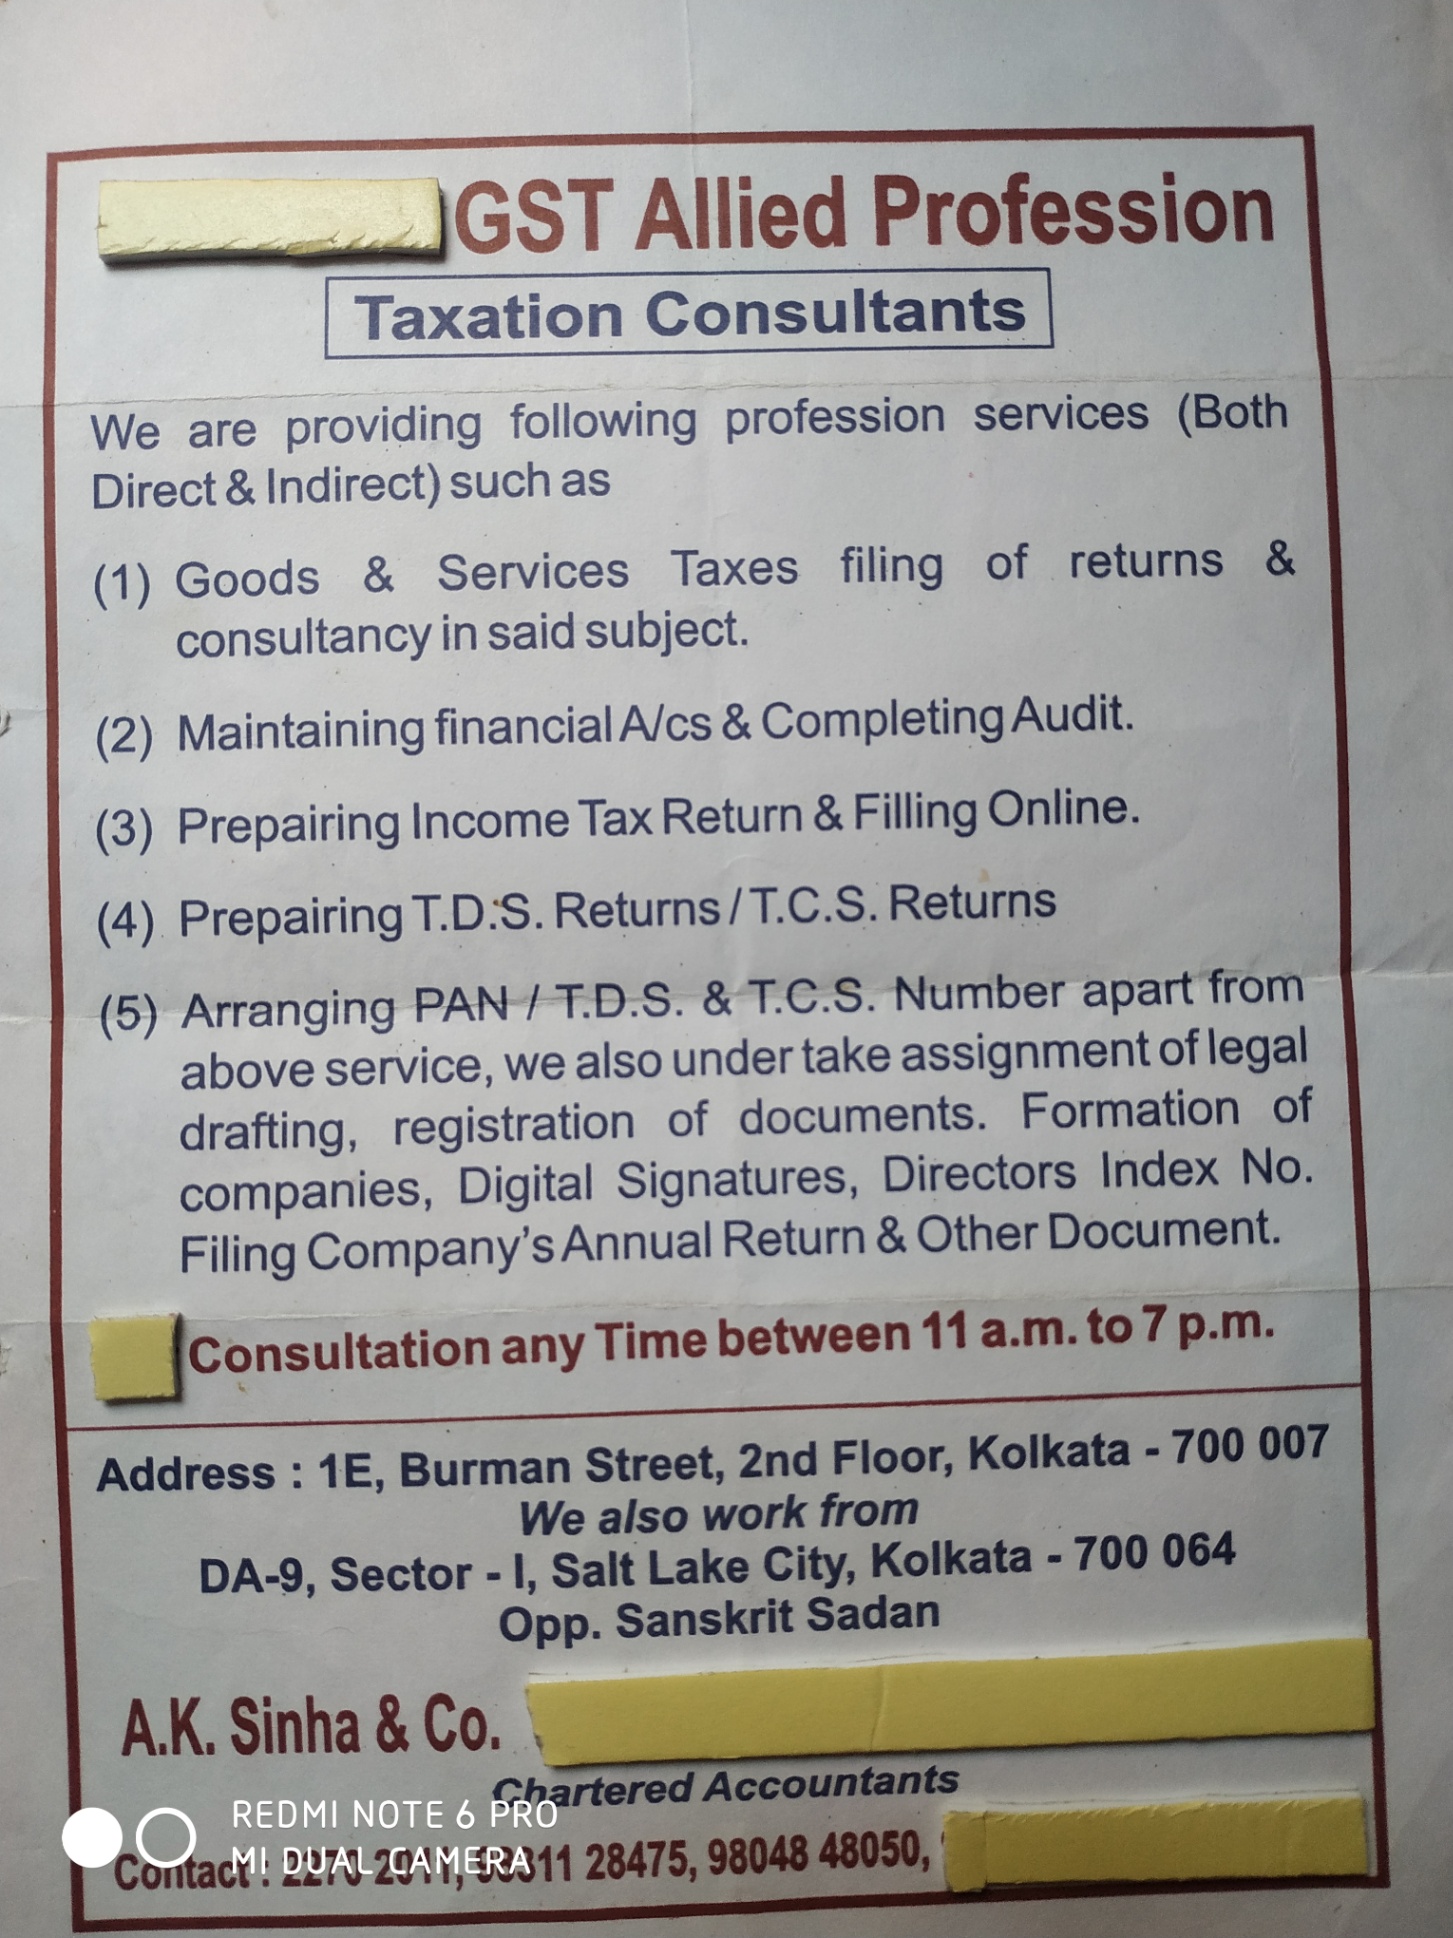 Tax Preparation, Accounting/ Tax services, Legal services, Real estate agent/ management, Other professional services, Insurance services; Exp: More than 15 year